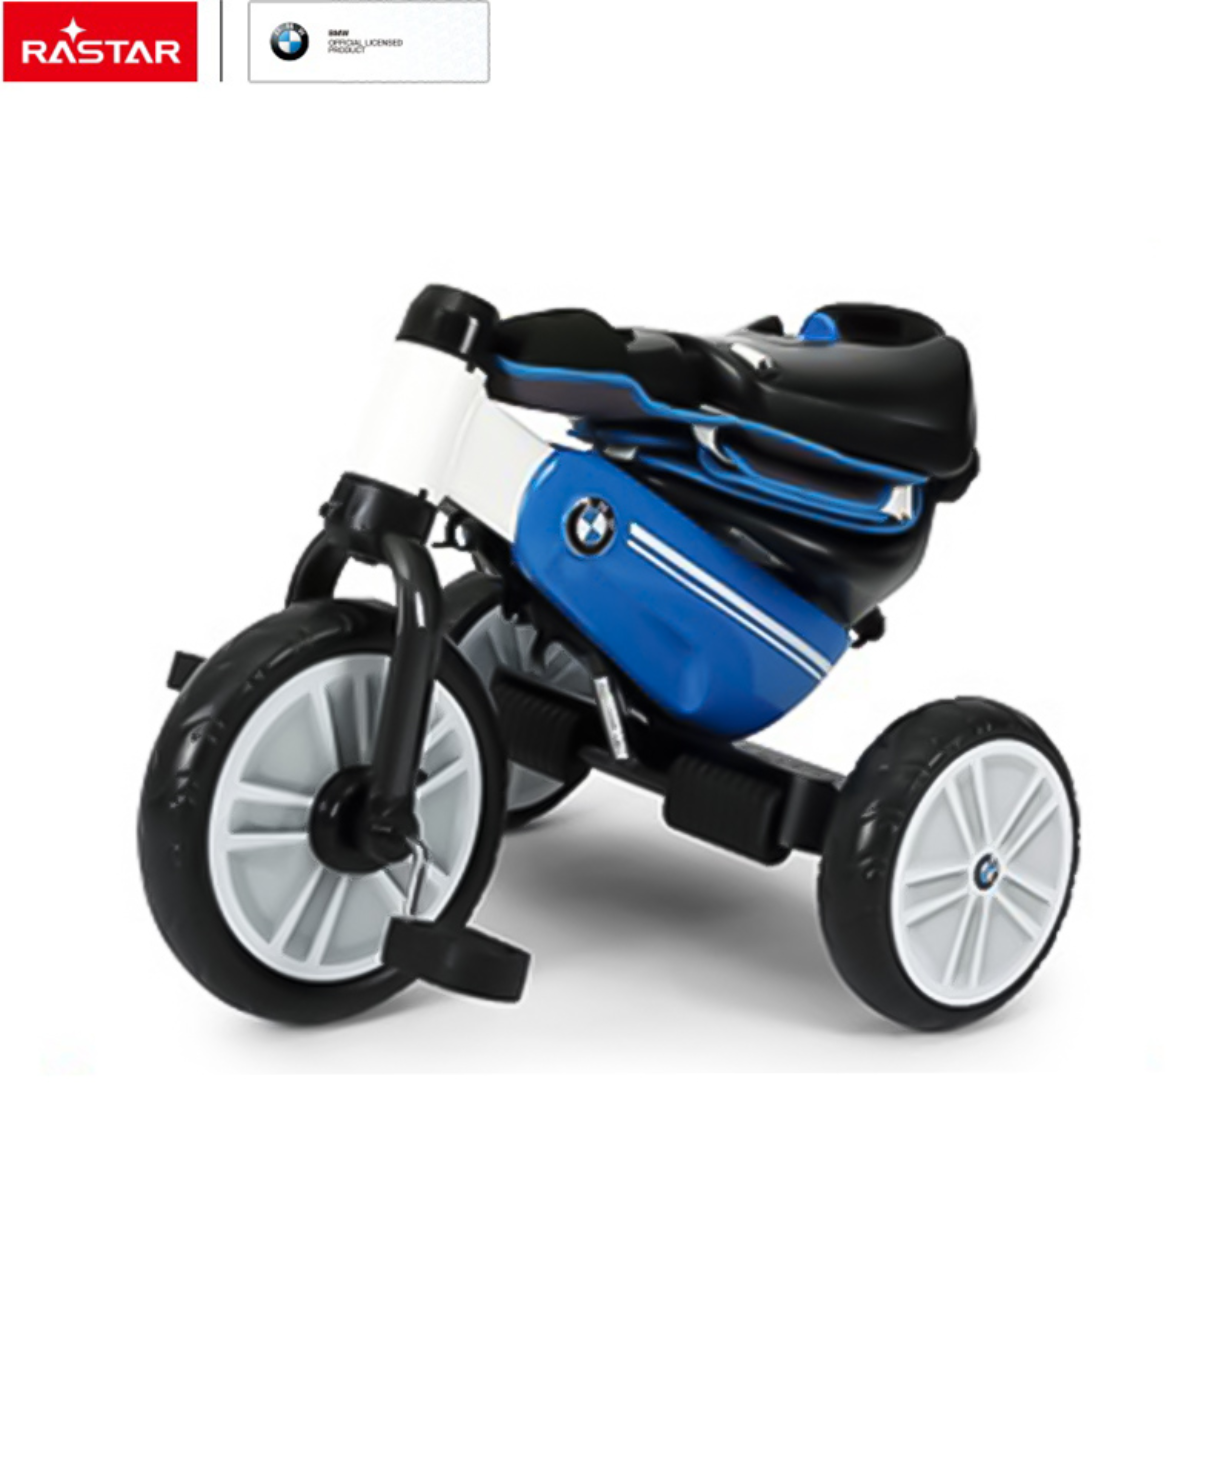 Rastar BMW Tricycle with handle